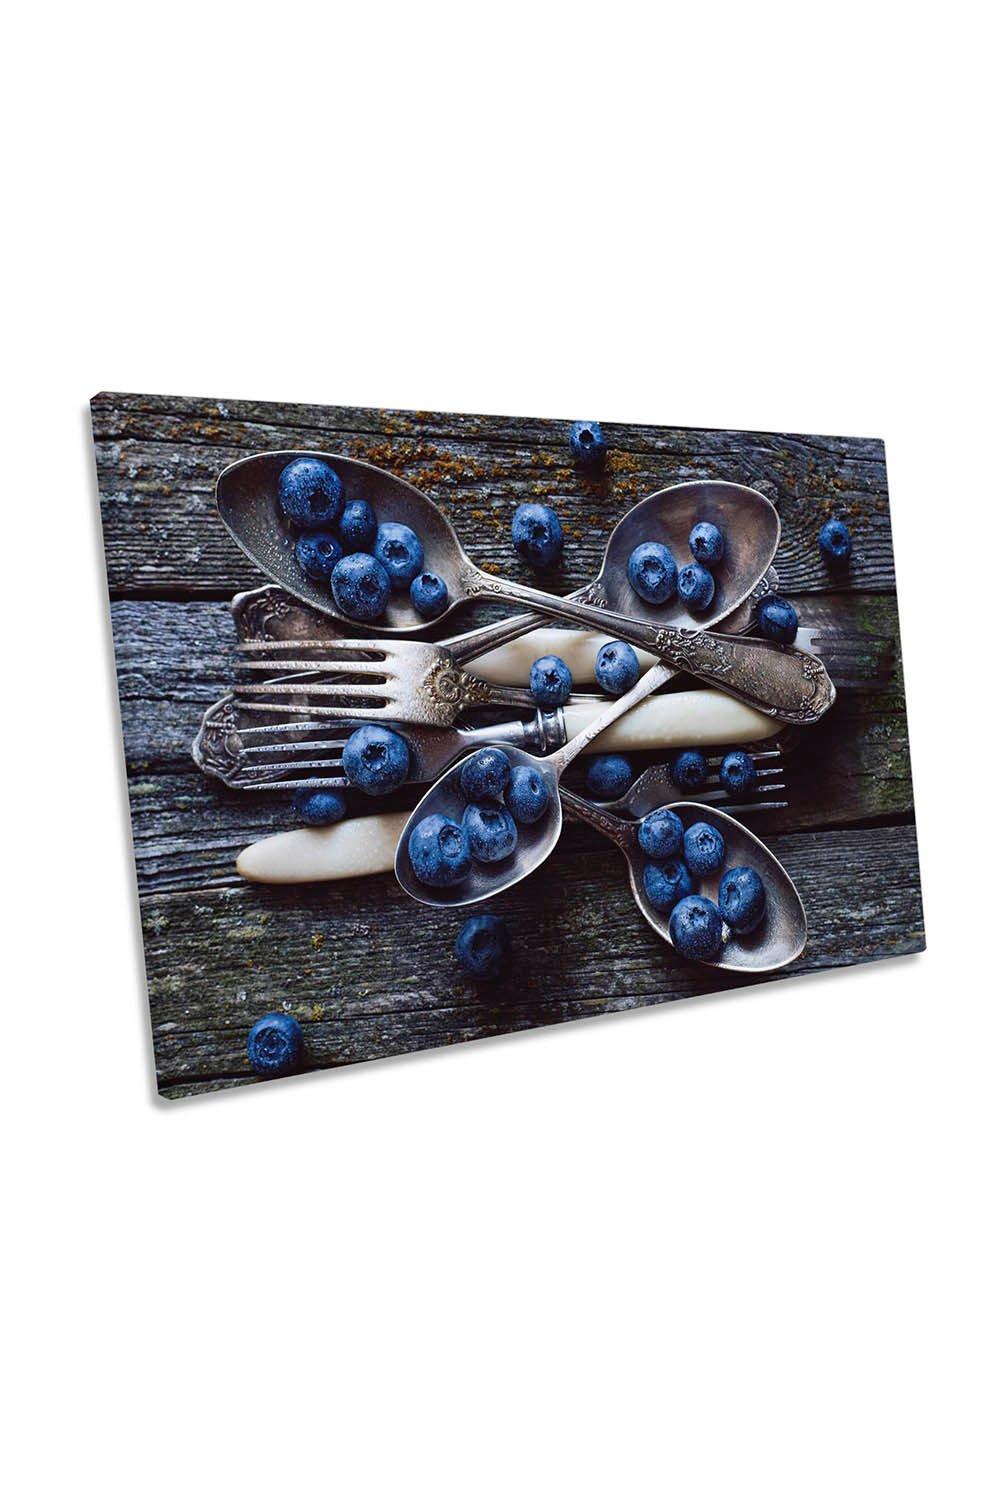 Blue Berries Spoons Kitchen Canvas Wall Art Picture Print